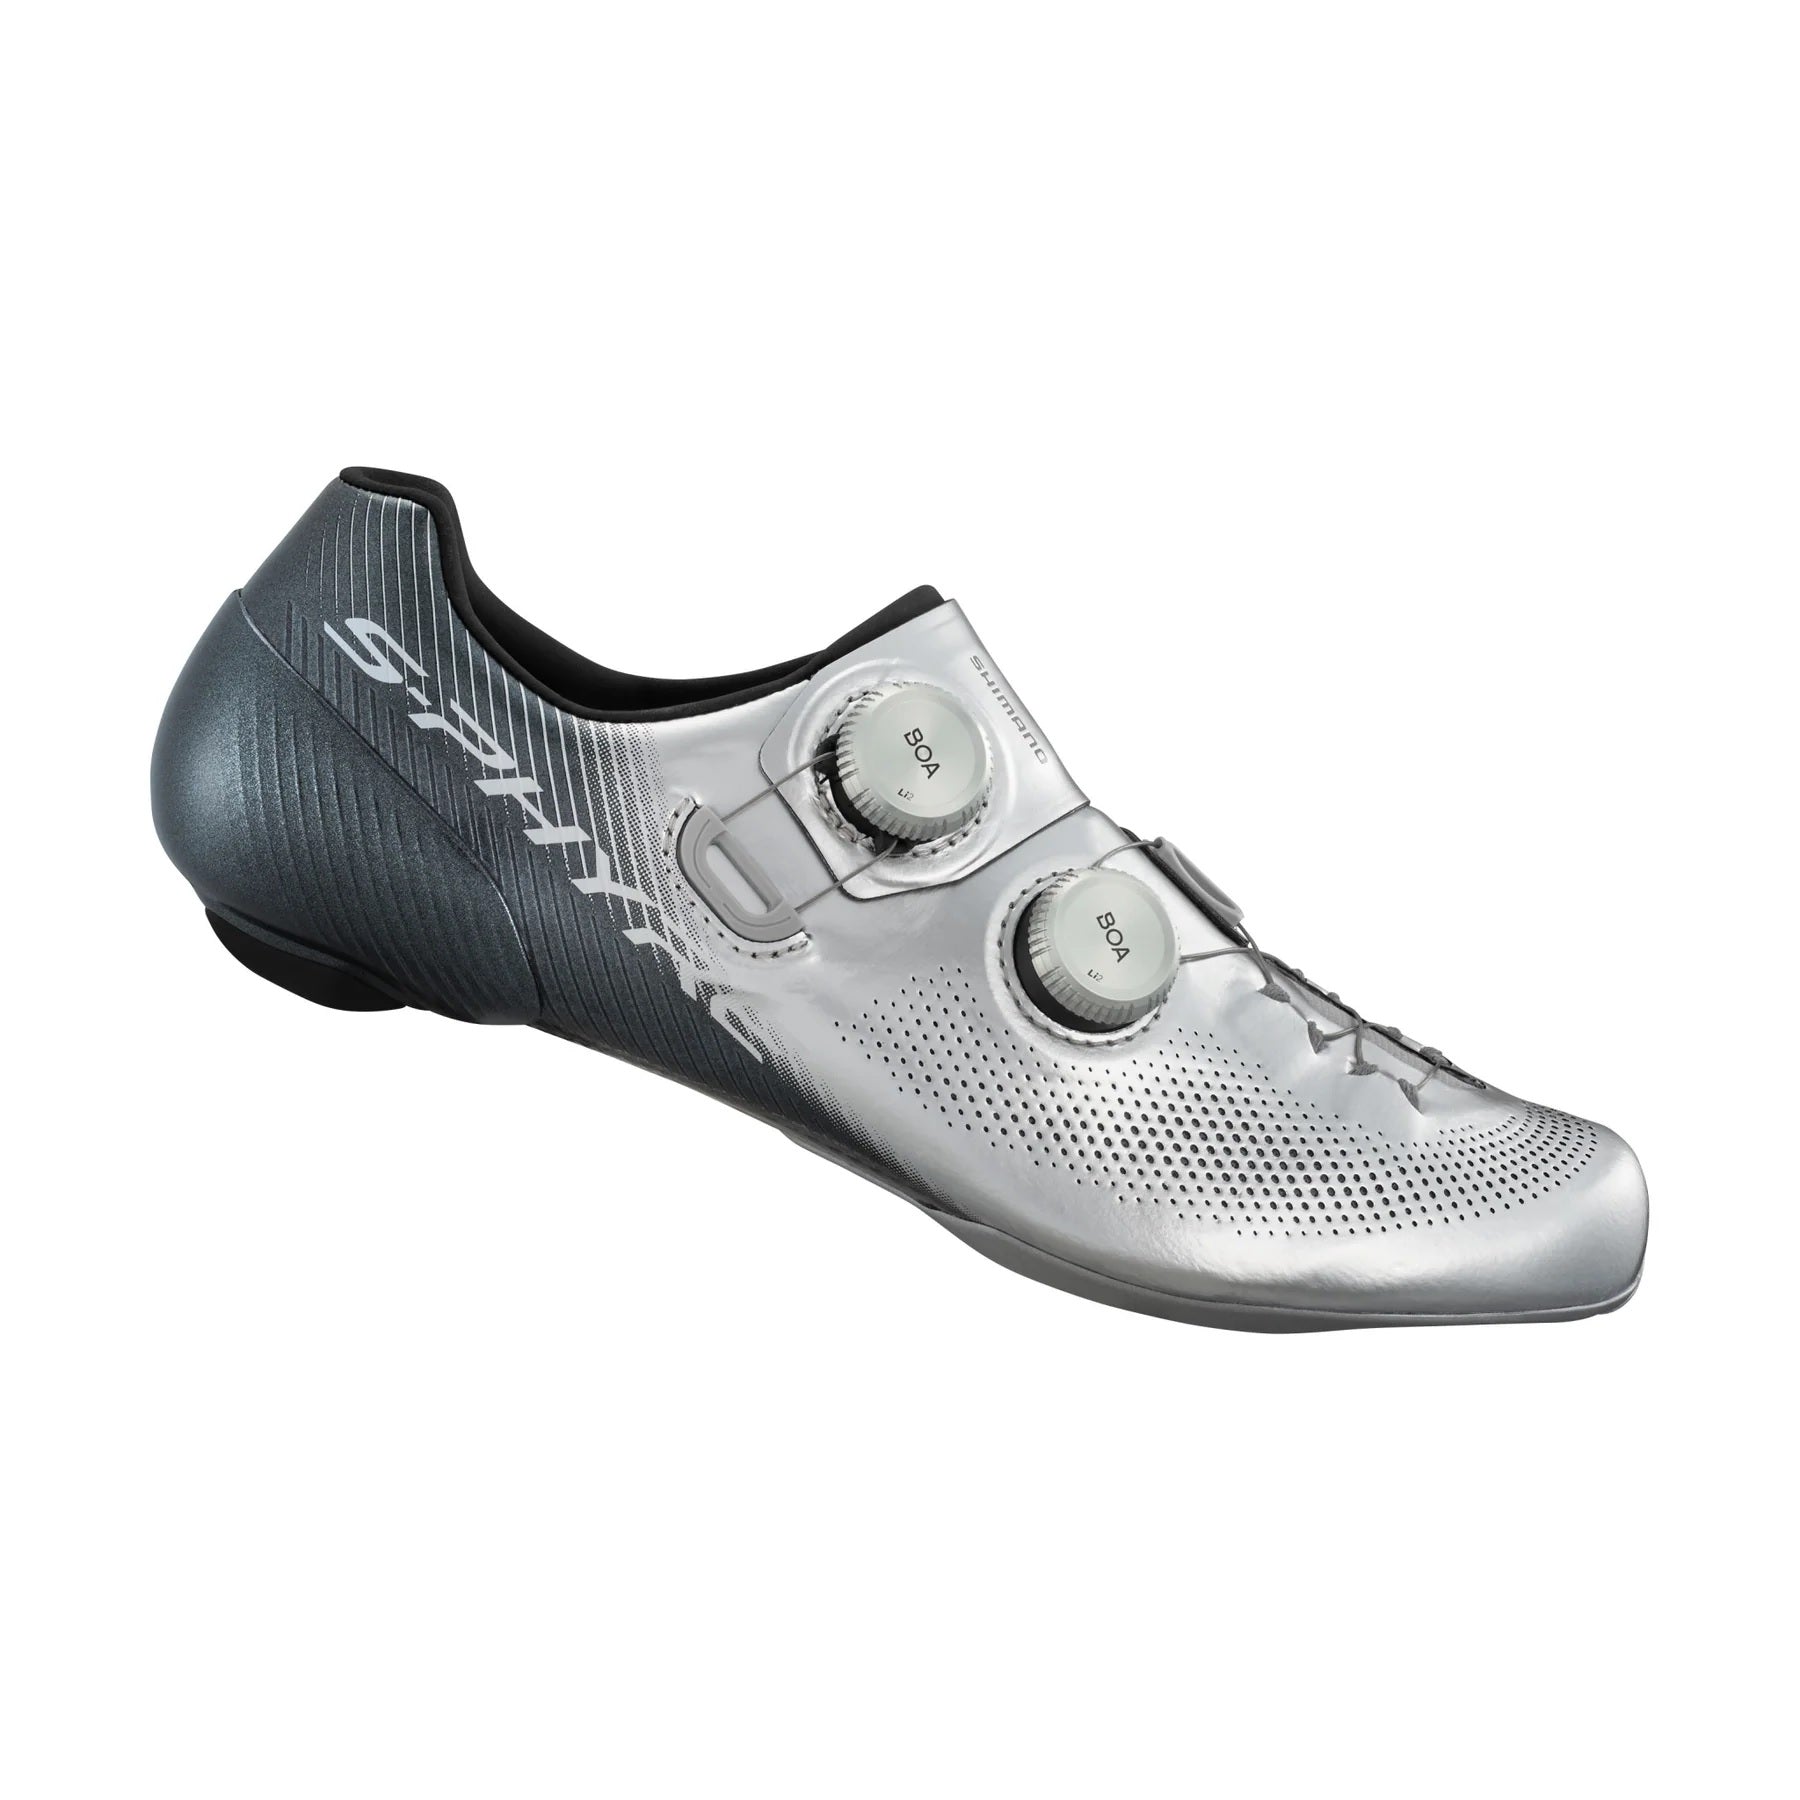 Shimano S-Phyre RC903S Special Edition Road Cycling Shoes